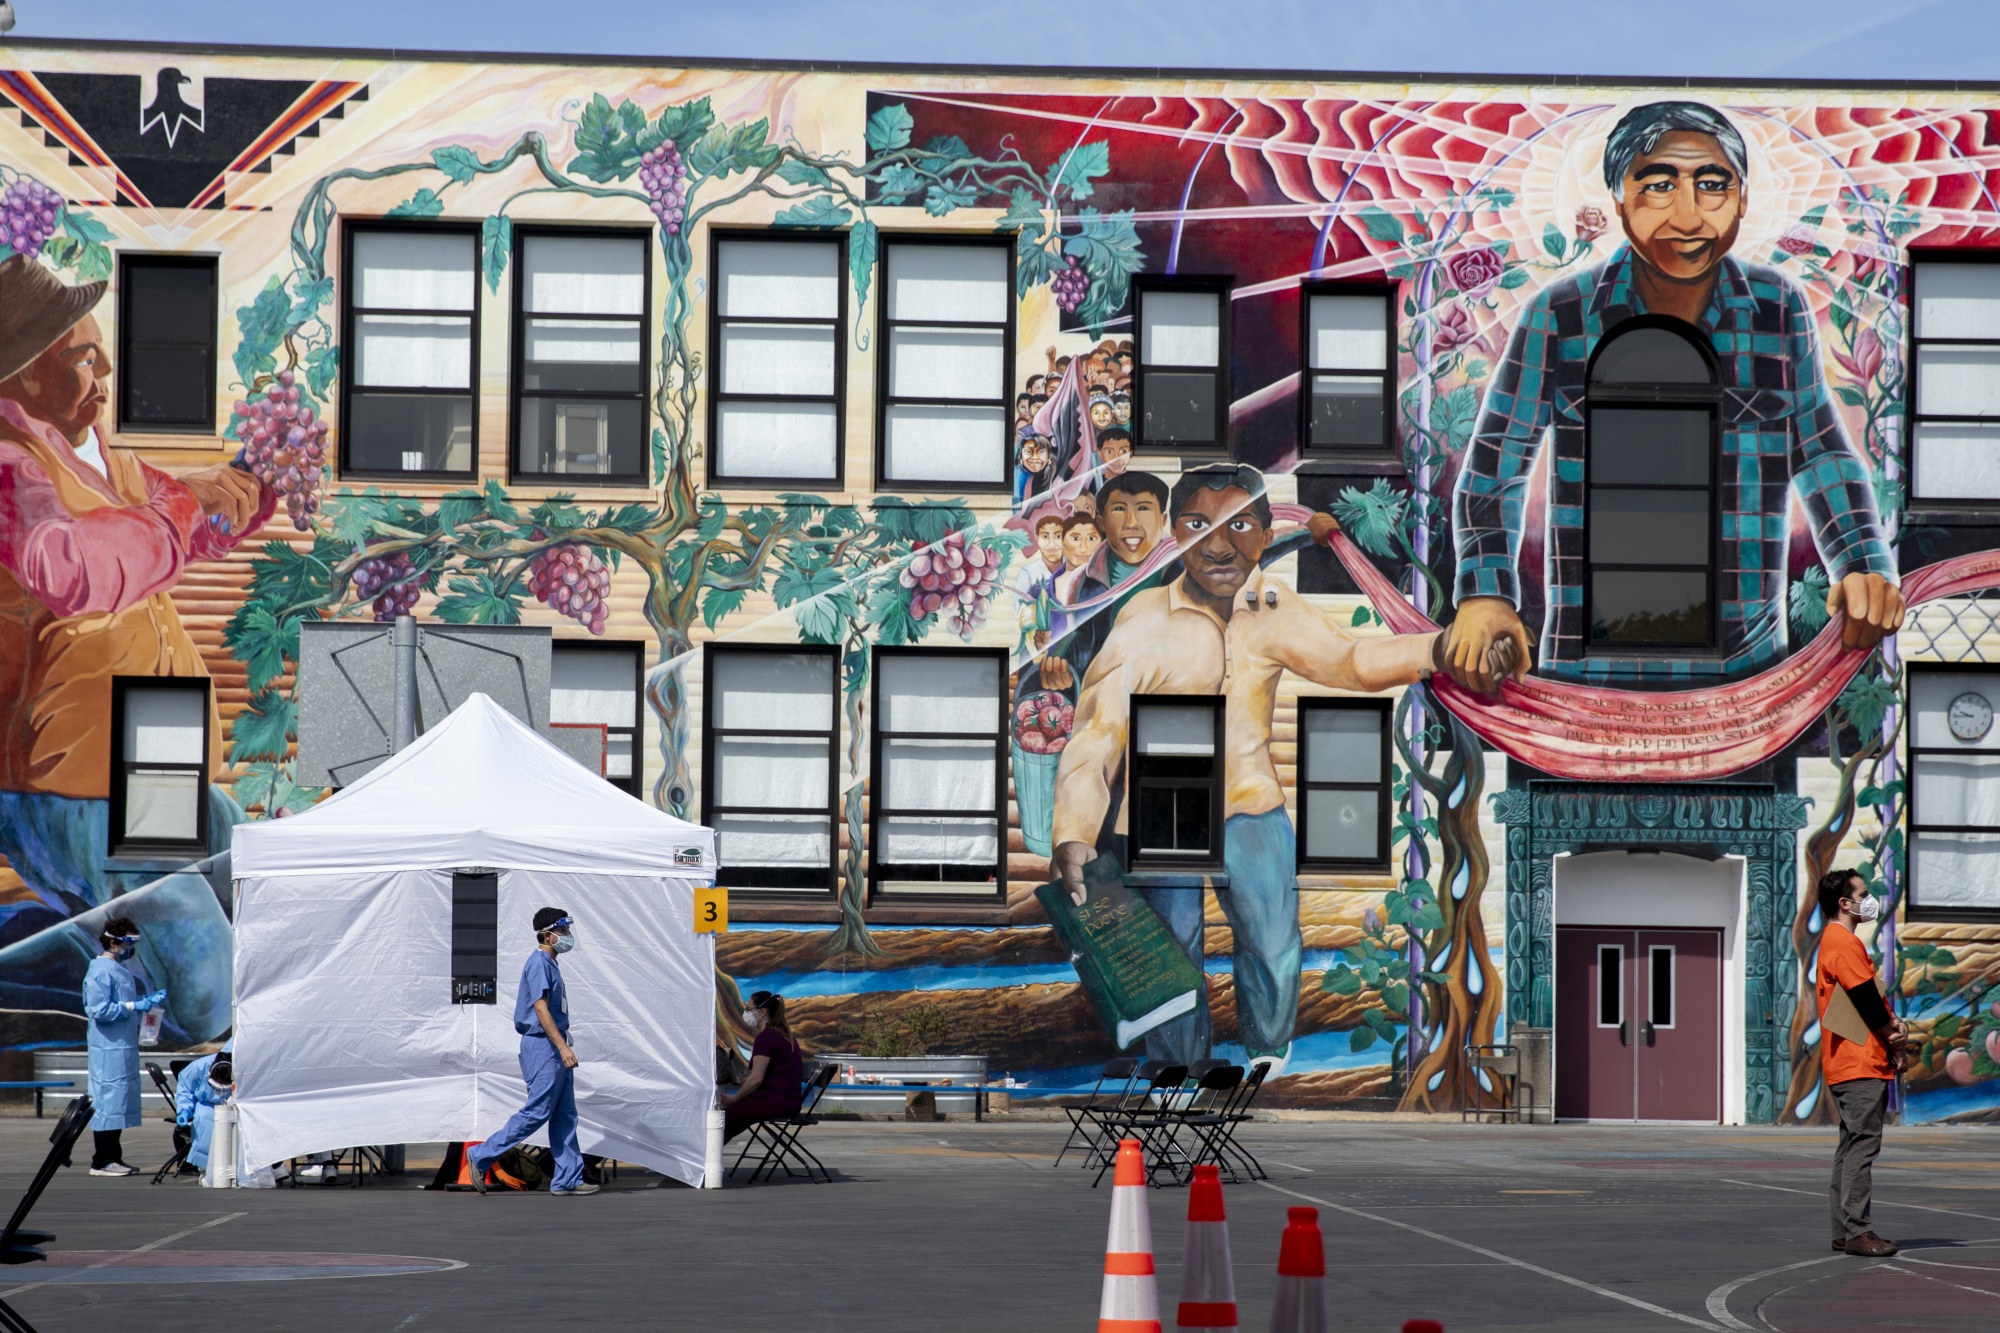 A coronavirus testing site in San Francisco’s&nbsp;Mission District in April.&nbsp;